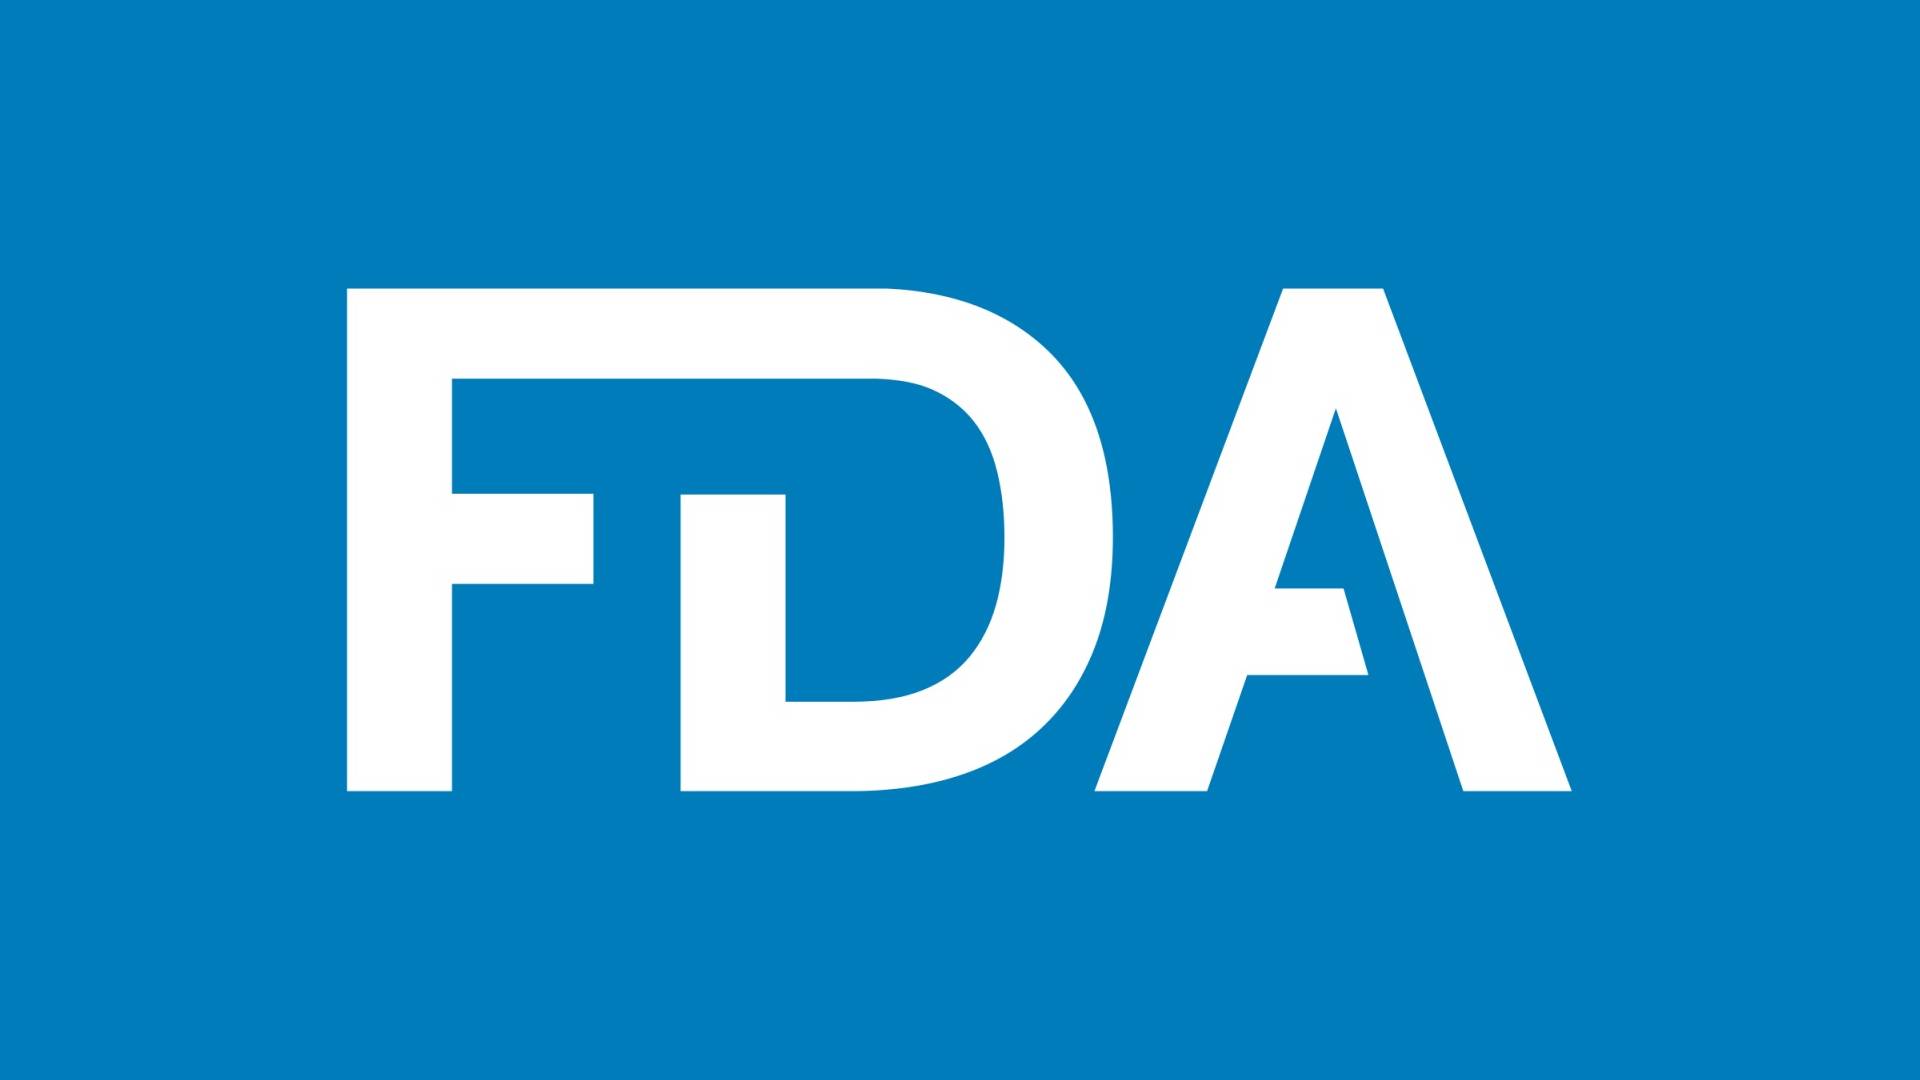 Health News Roundup: FDA warns online vendors selling misbranded weight-loss, diabetes drugs; US CDC plans to drop five-day COVID isolation guidelines - Washington Post and more 